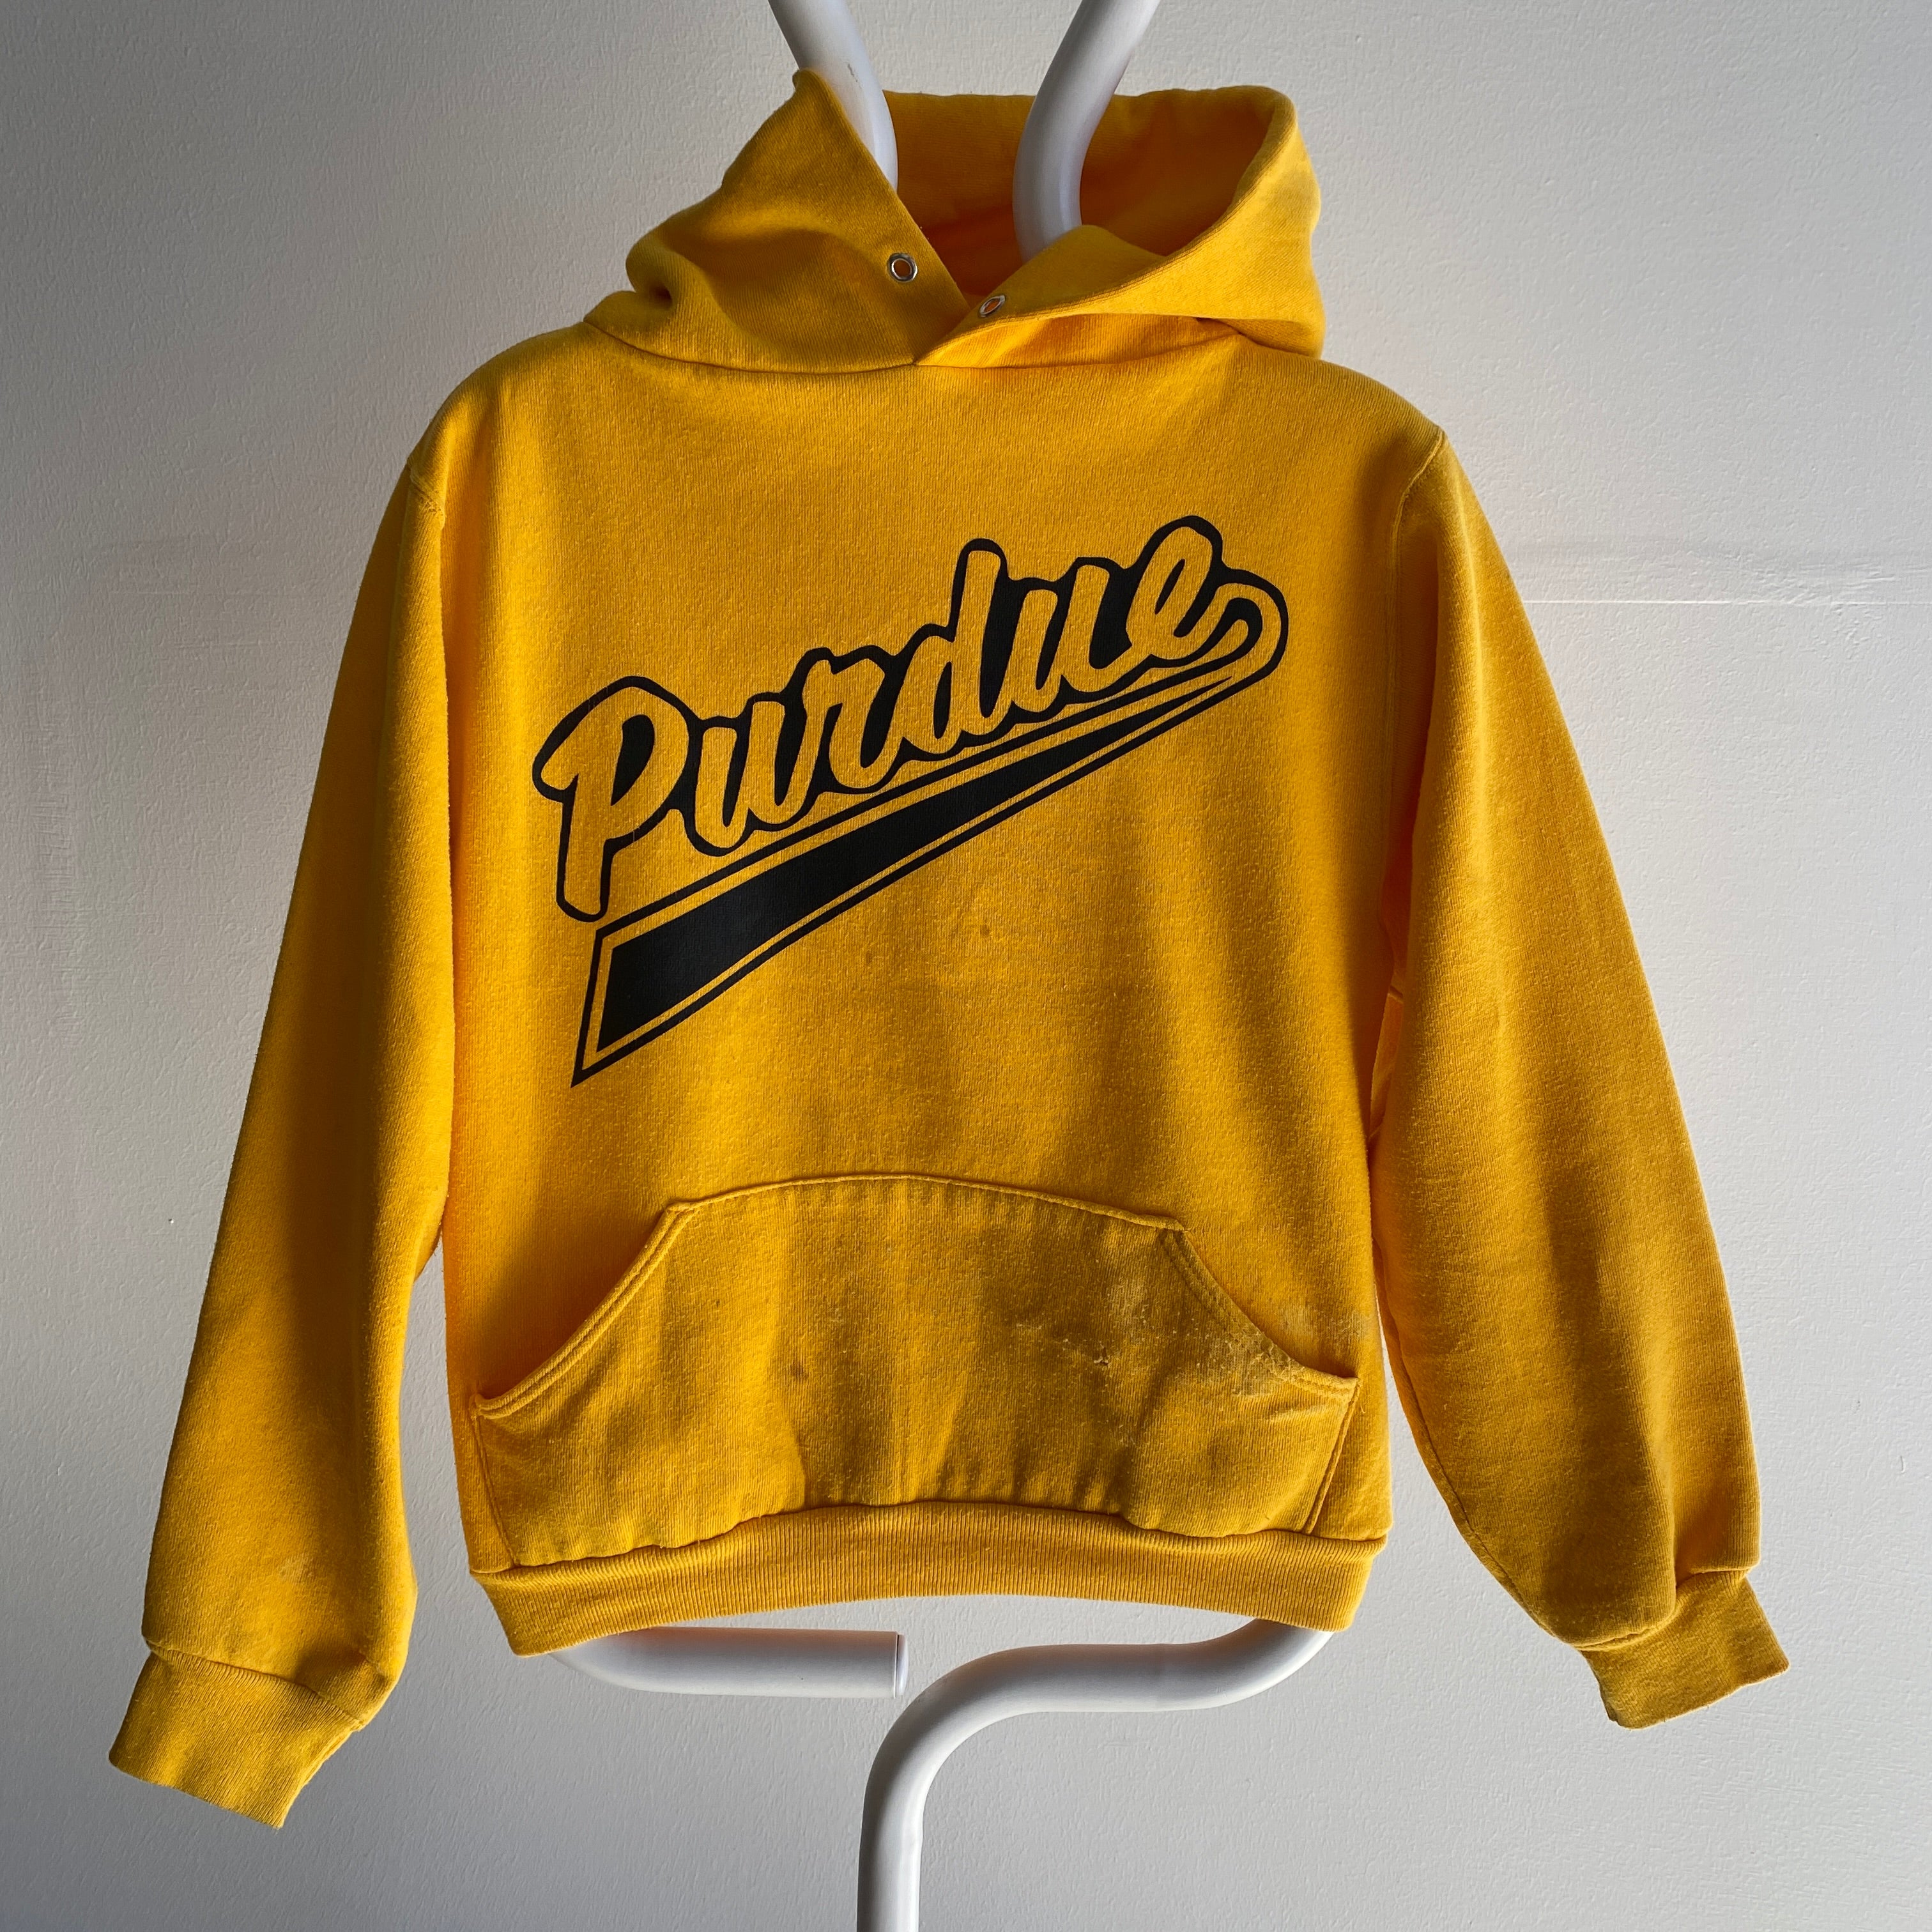 1970s Russell Brand Purdue Pullover Hoodie - Heavily Stained